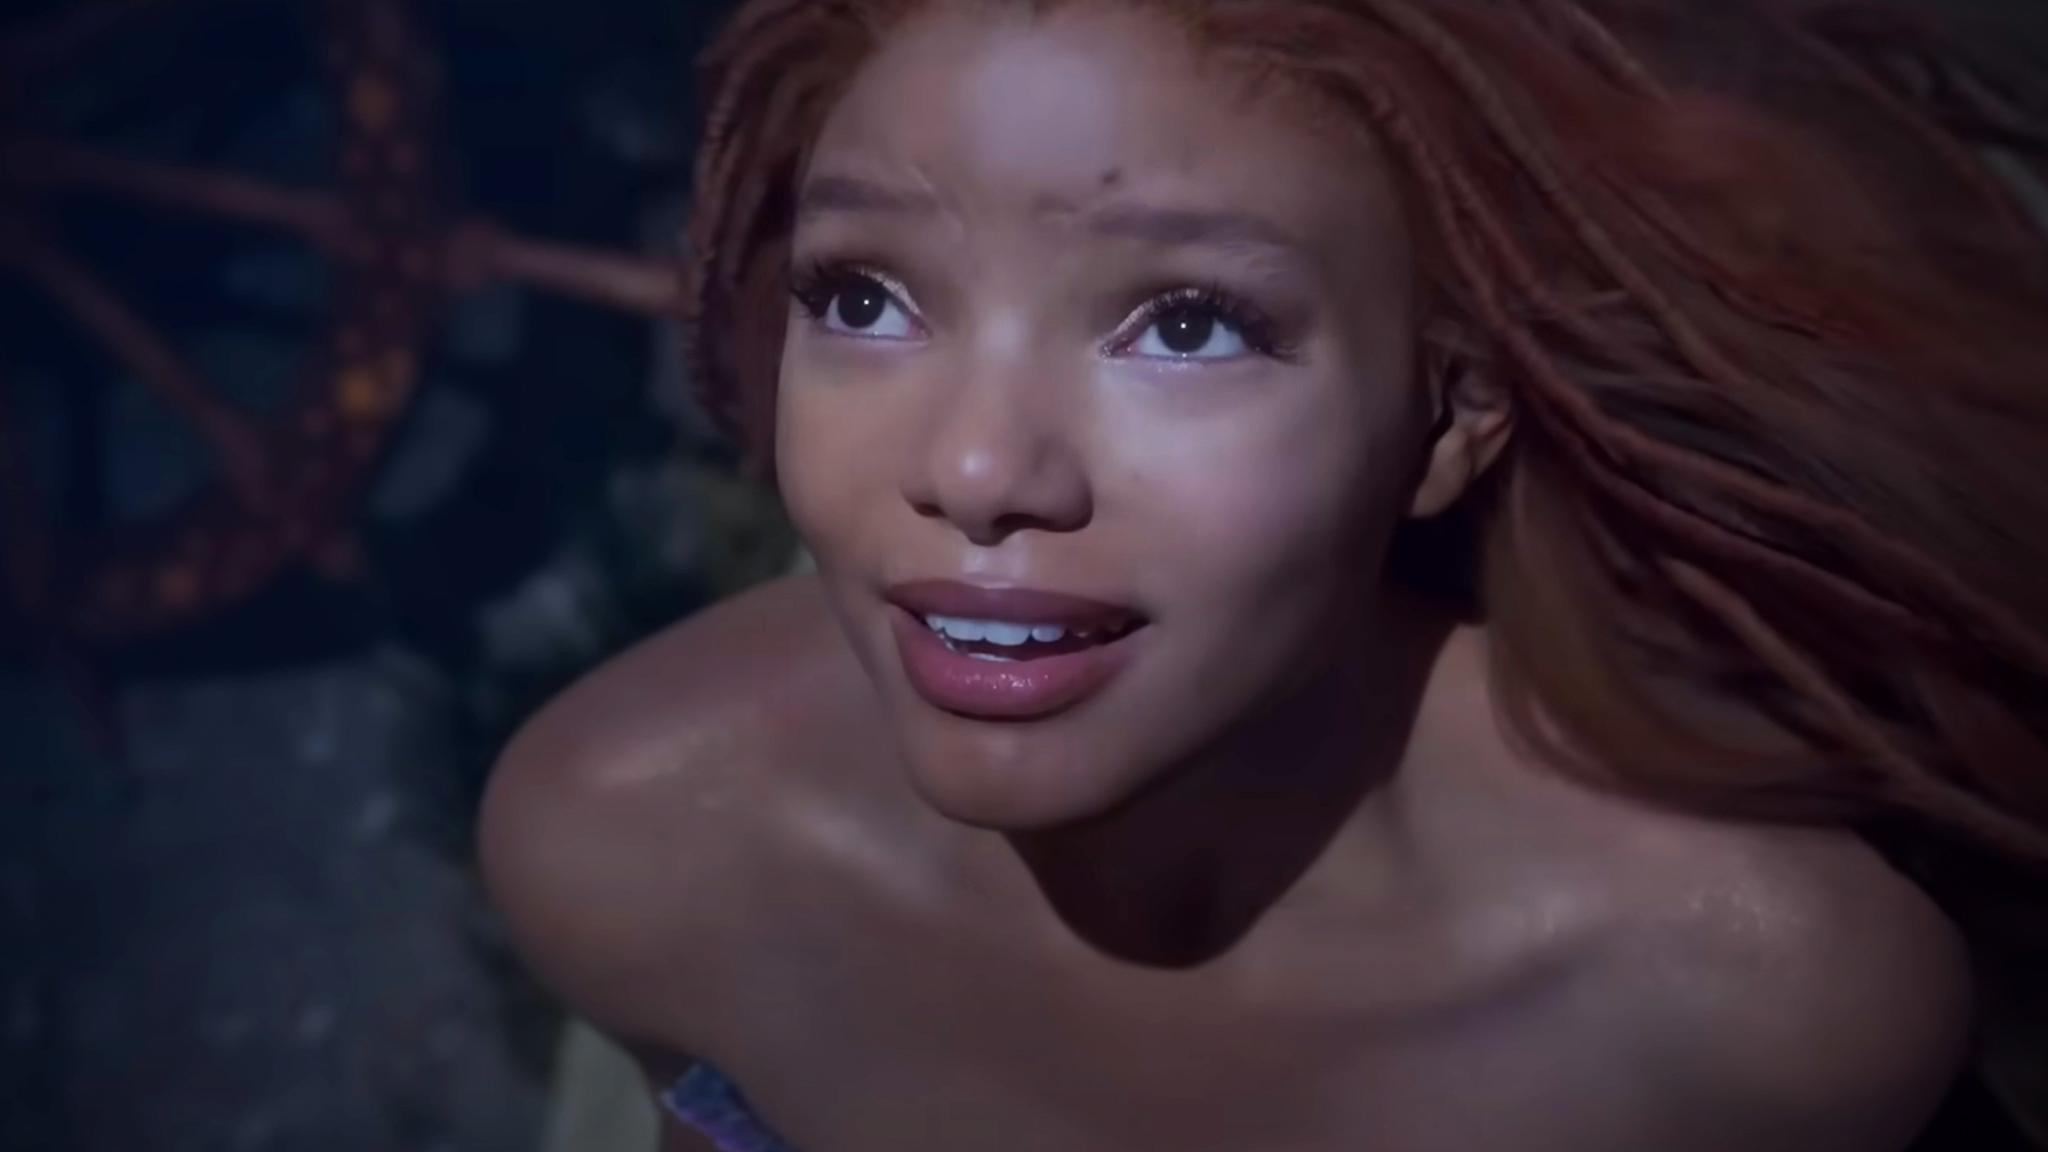 The Little Mermaid Fans React To Disneys Live Action Film Trailer Cbbc Newsround